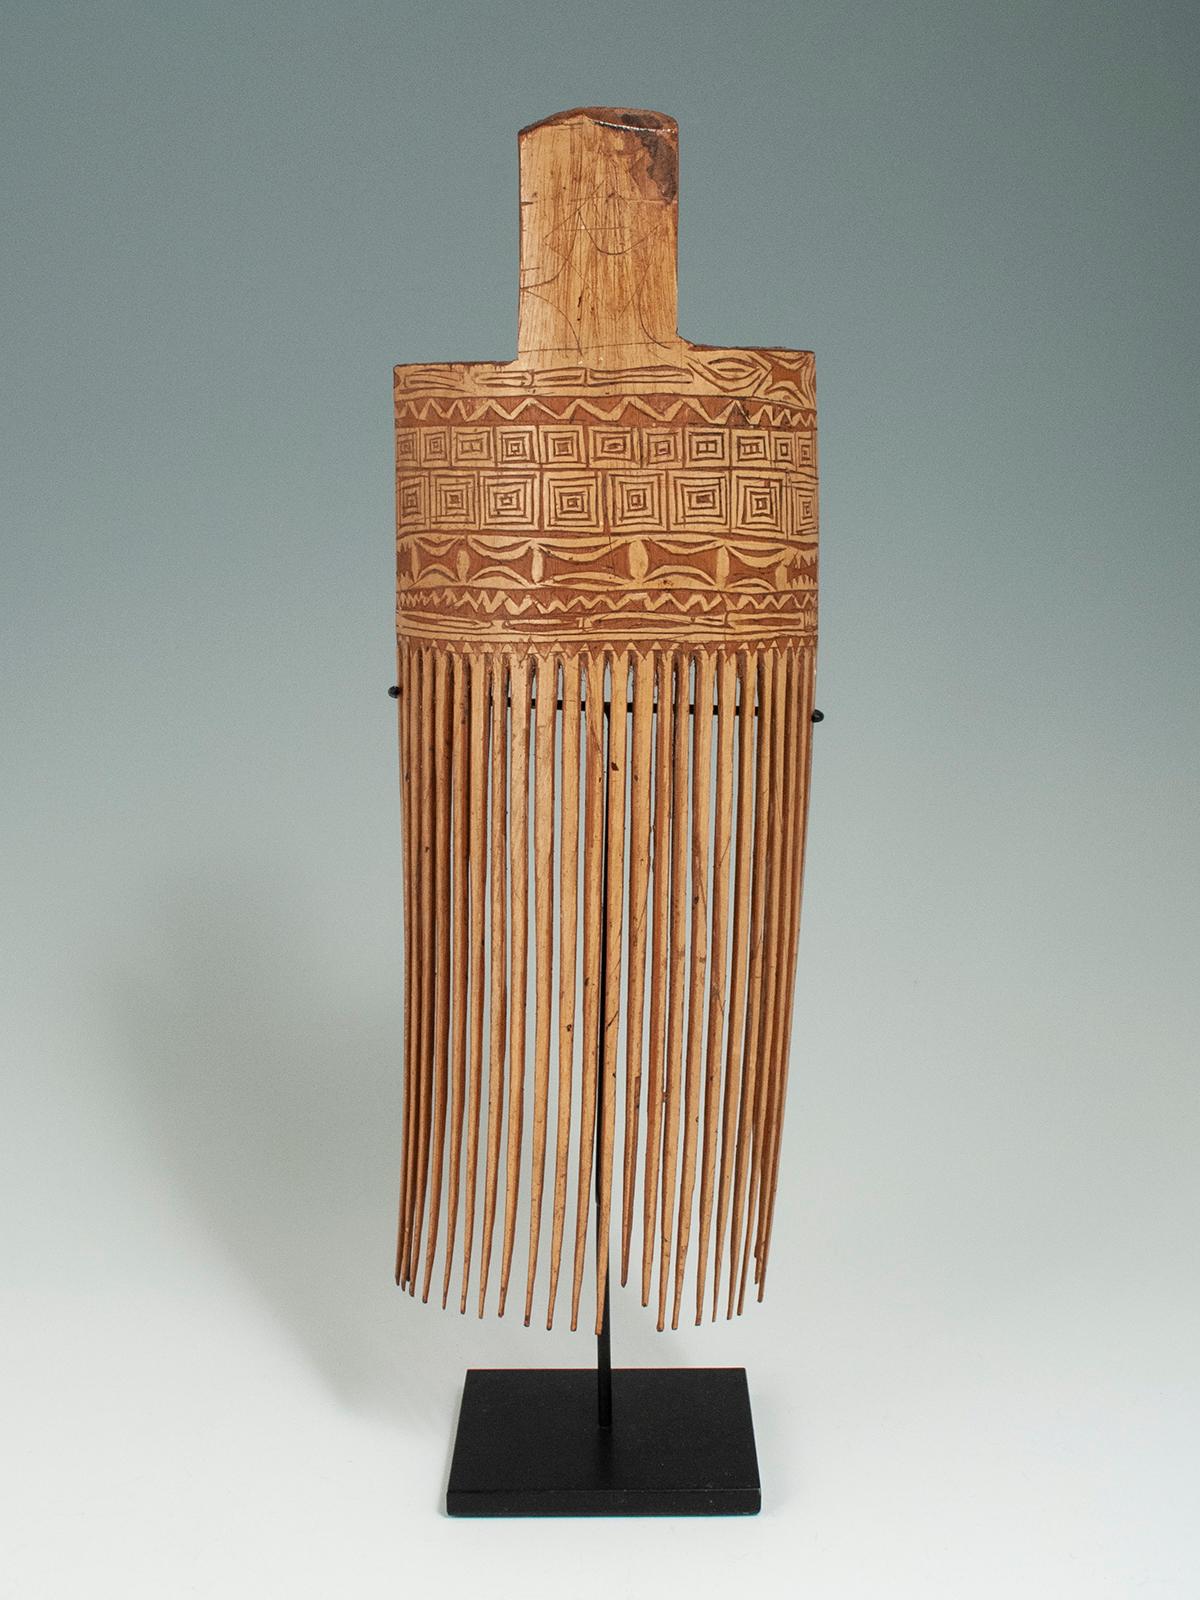 Mid to late 20th century incised bamboo comb, Huon Gulf, Morobe Province, Papua New Guinea

This large incised comb is typical of the bamboo combs of the Huon Gulf area. This particular example is 11.5 inches high and 4.25 inches wide, or 13